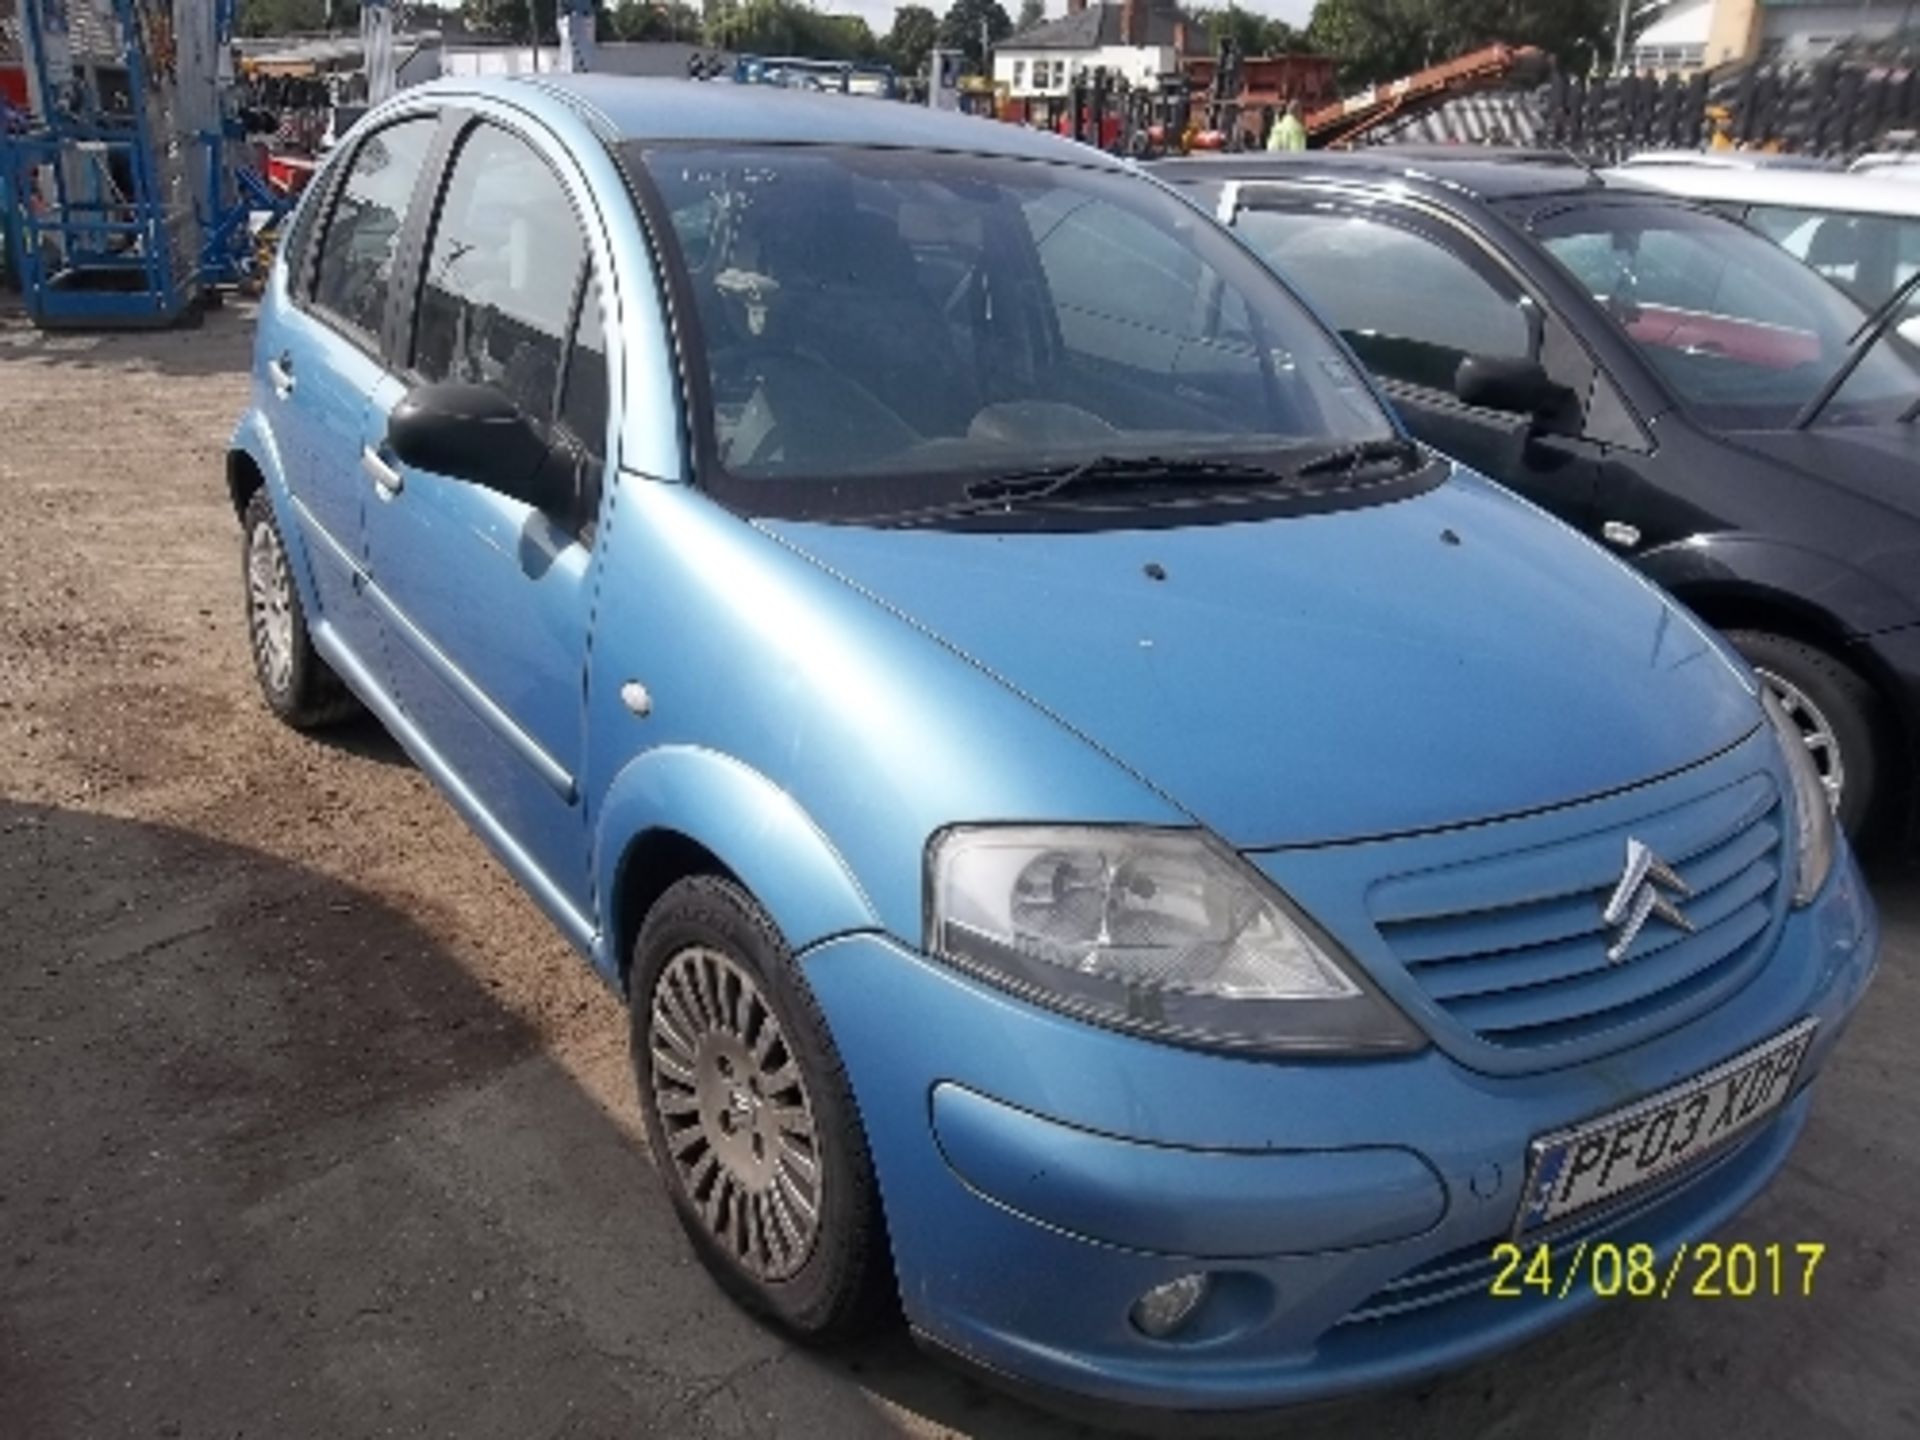 Citroen C3 Exclusive - PF03 XDP Date of registration: 31.05.2003 1587cc, petrol, 5 speed auto, - Image 2 of 4